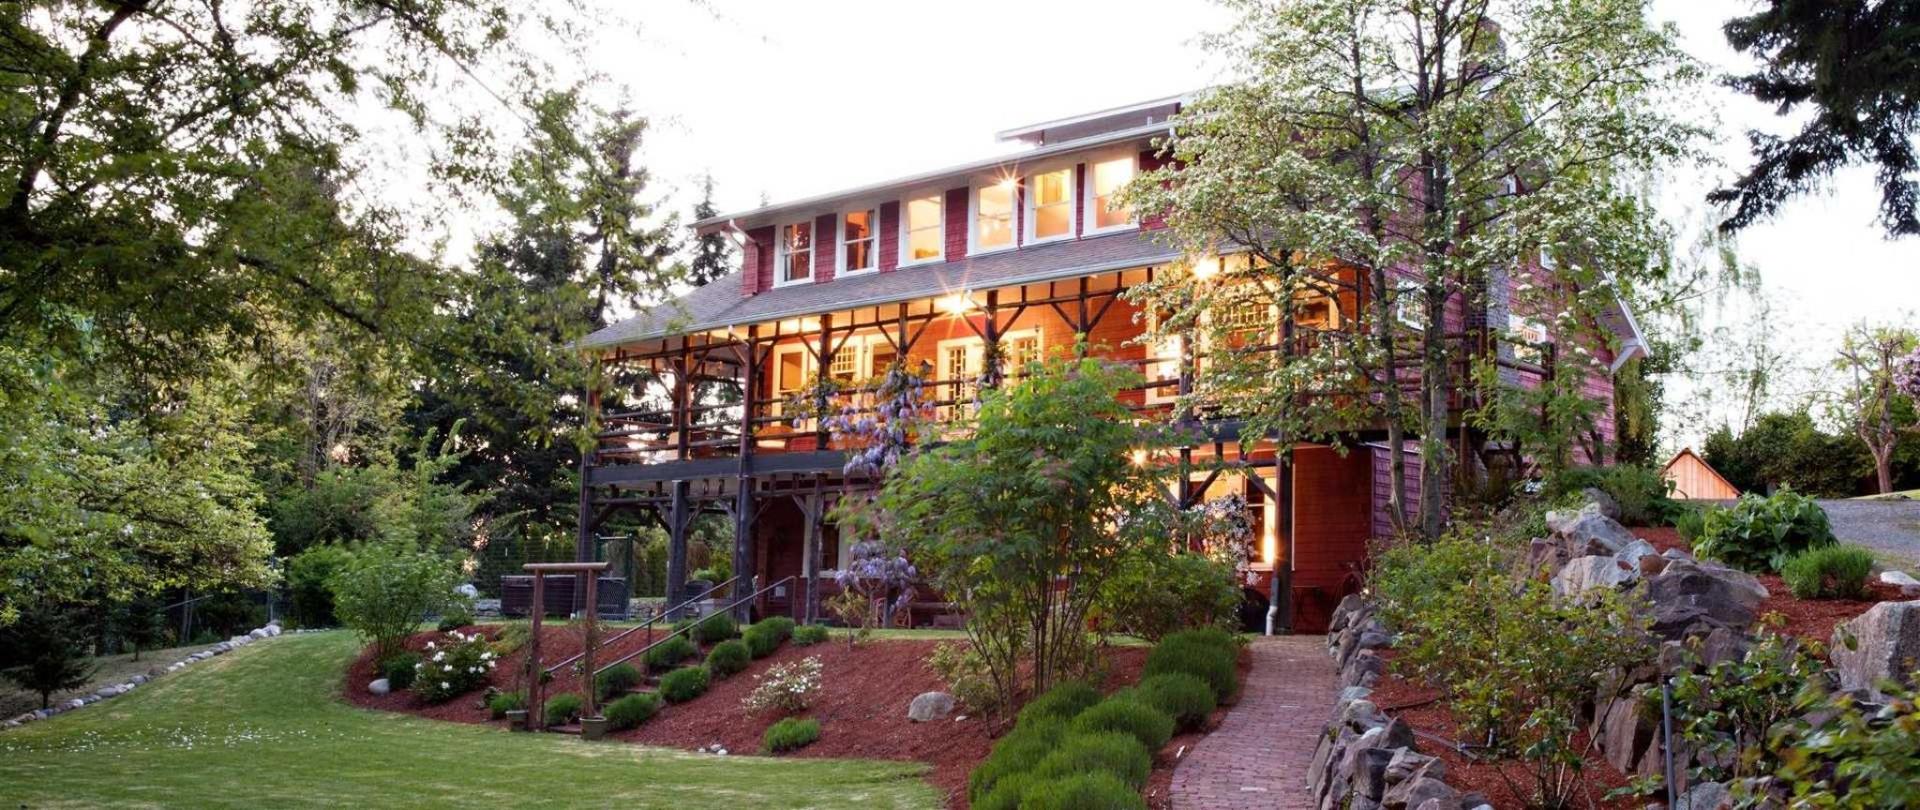 The Gatewood Bed and Breakfast - West Seattle - United States